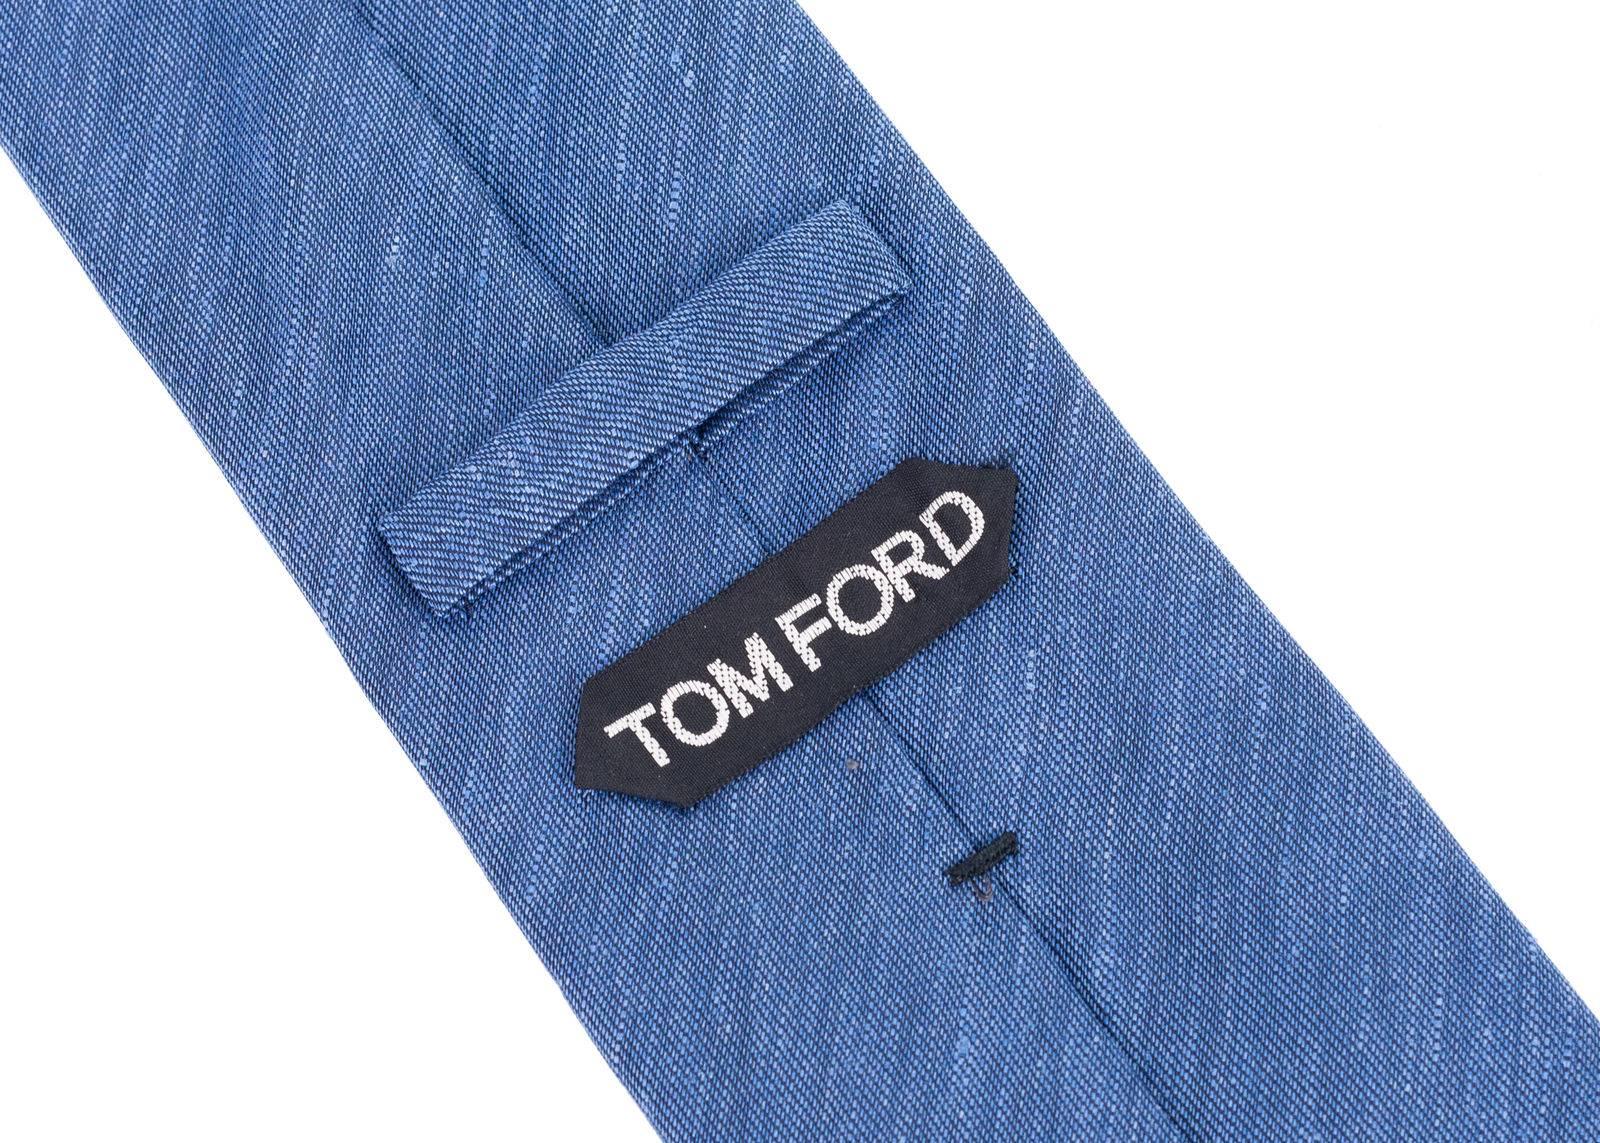 Italian luxury brand, Tom Ford, has crafted these gorgeous Silk Blend Tie for important special occasions and professional events. The tie is great to pair with your favorite solid color button down and blazers with your chosen pair or classic